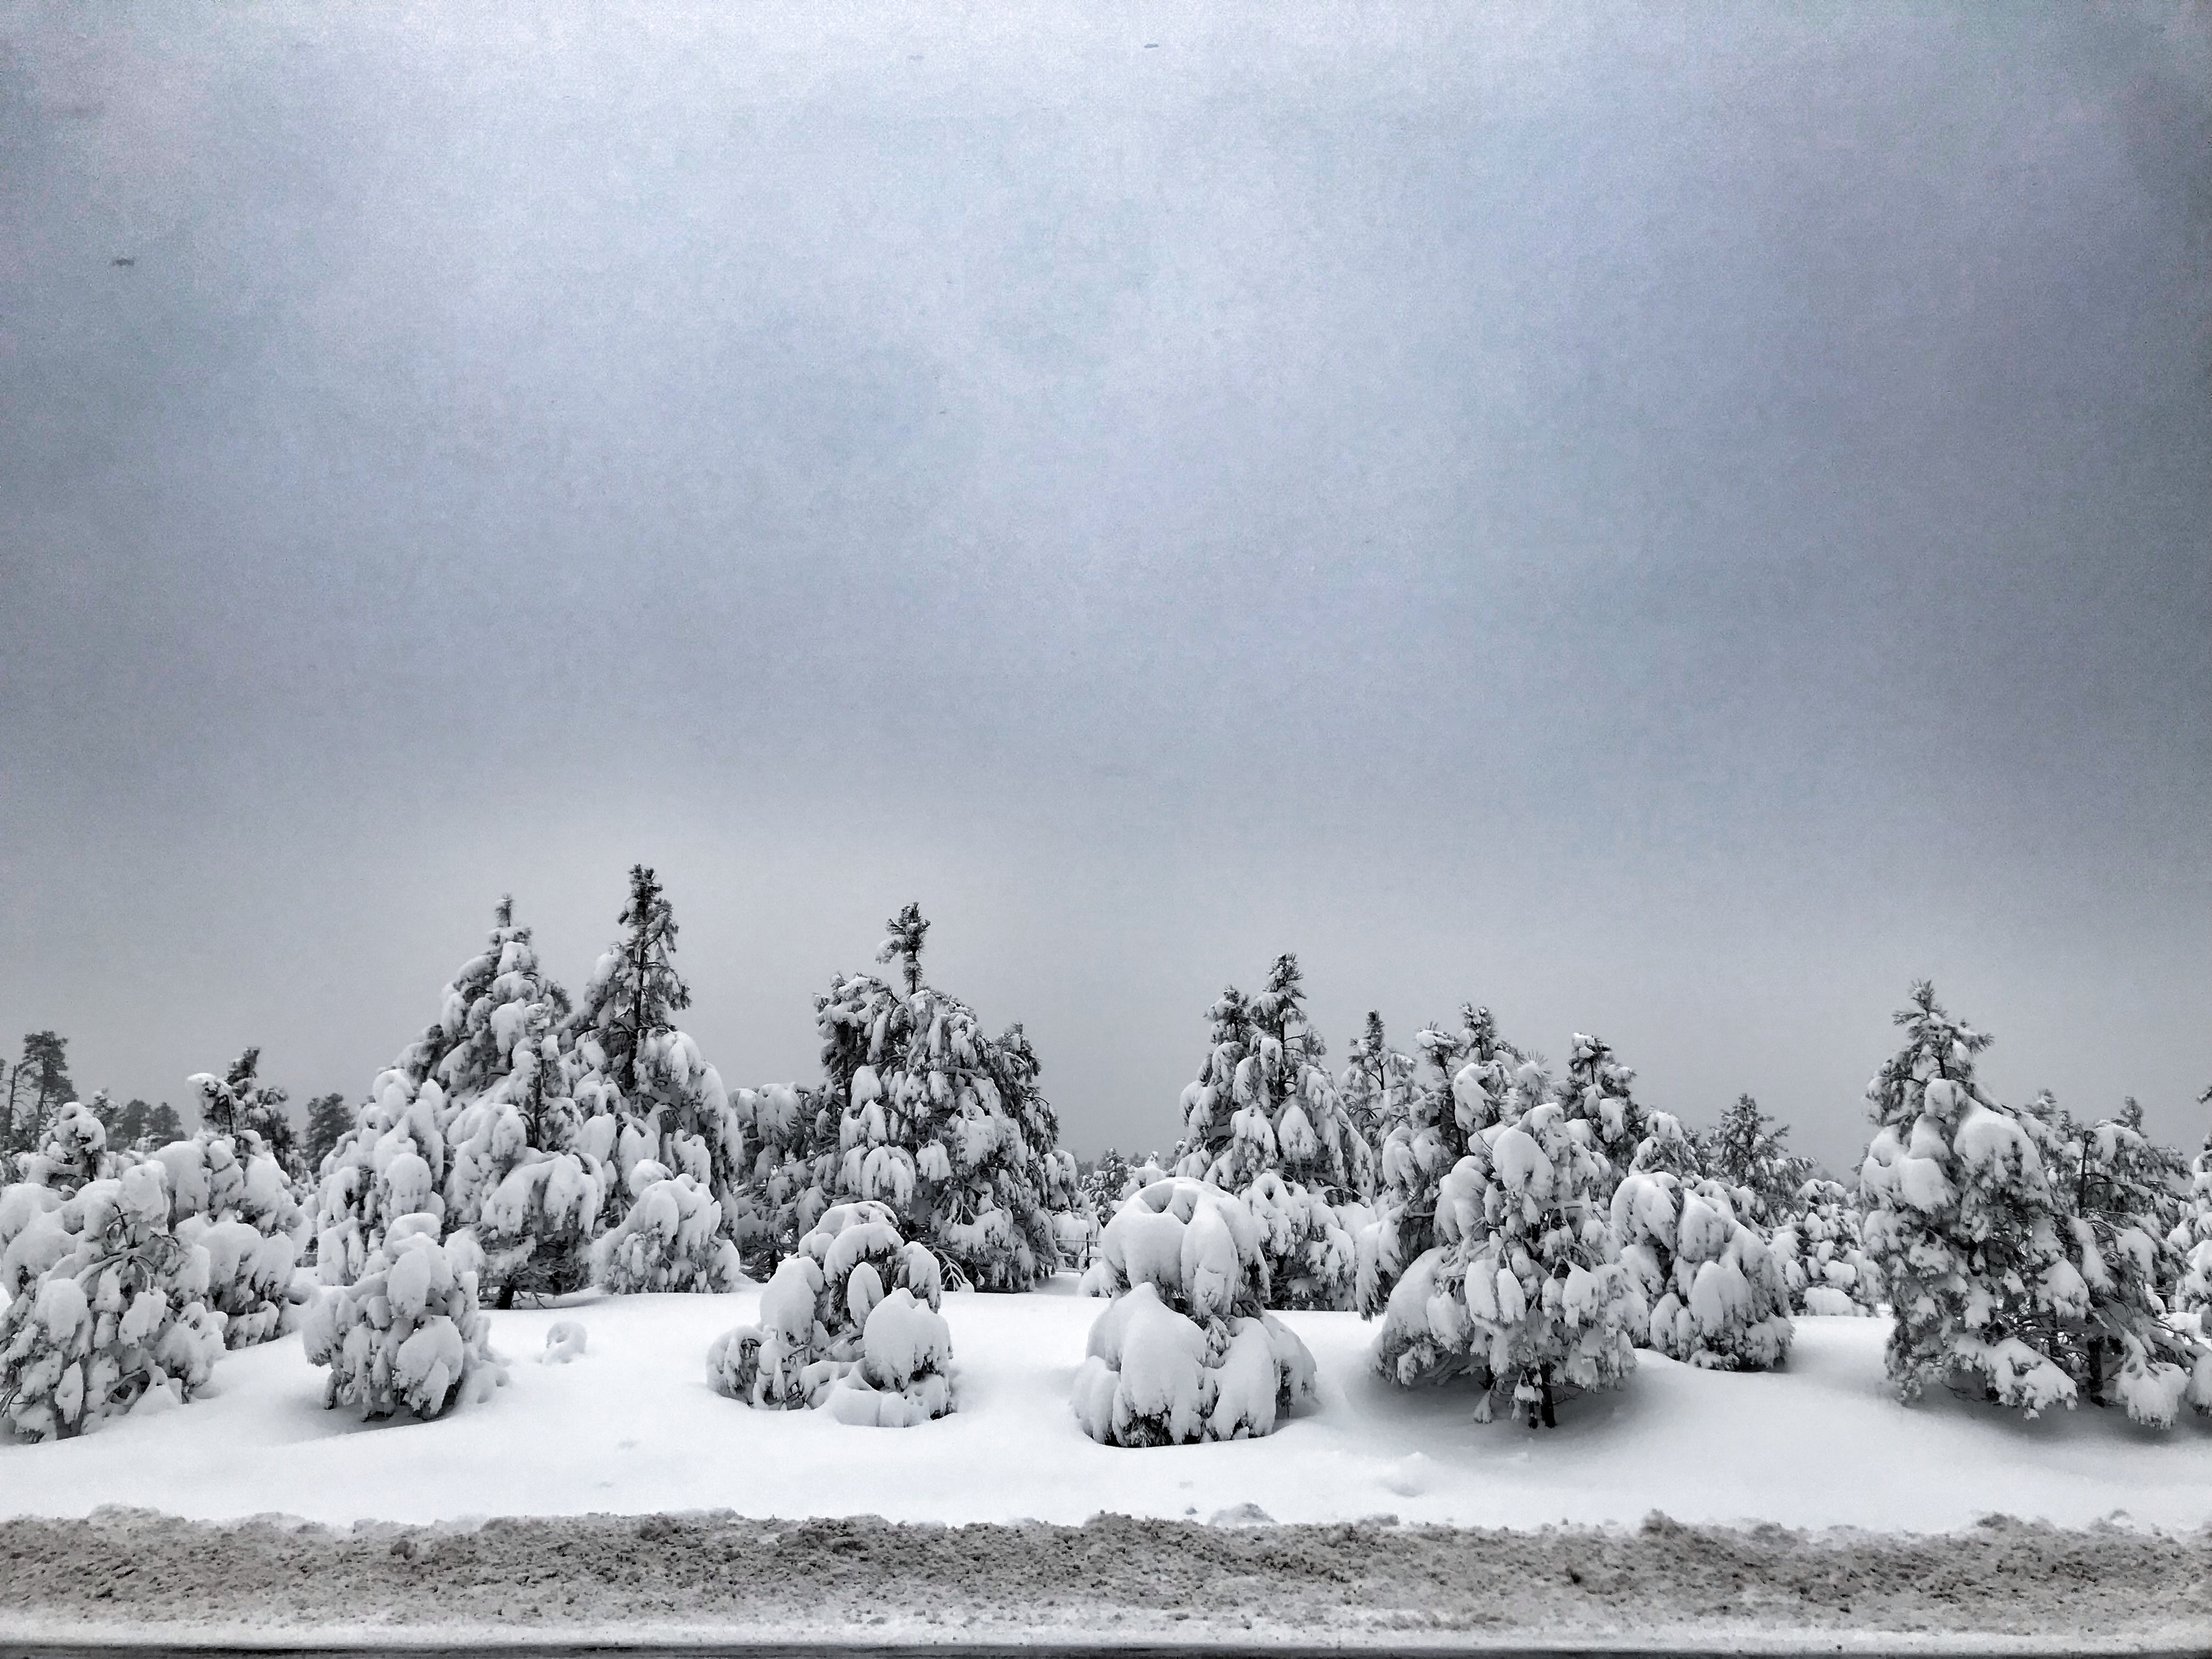 Photo by Corrie Burton  |  Snow and stormy skies surrounding Ponderosa pines in the White Mountains.  